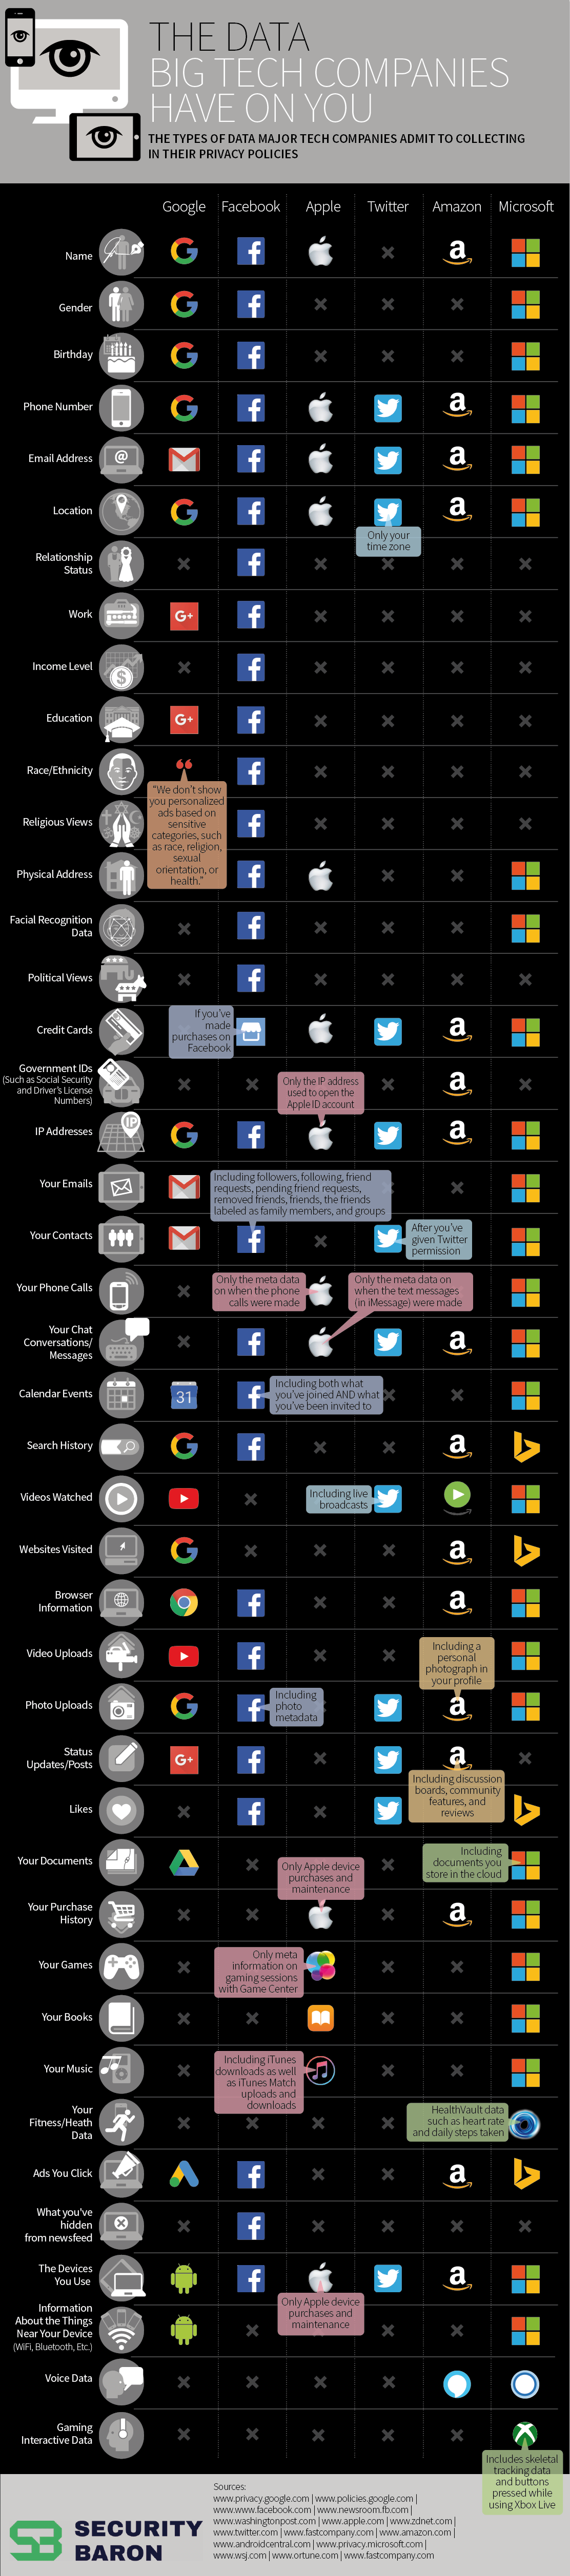 The Data the Big Tech Companies Have On You #Infographic